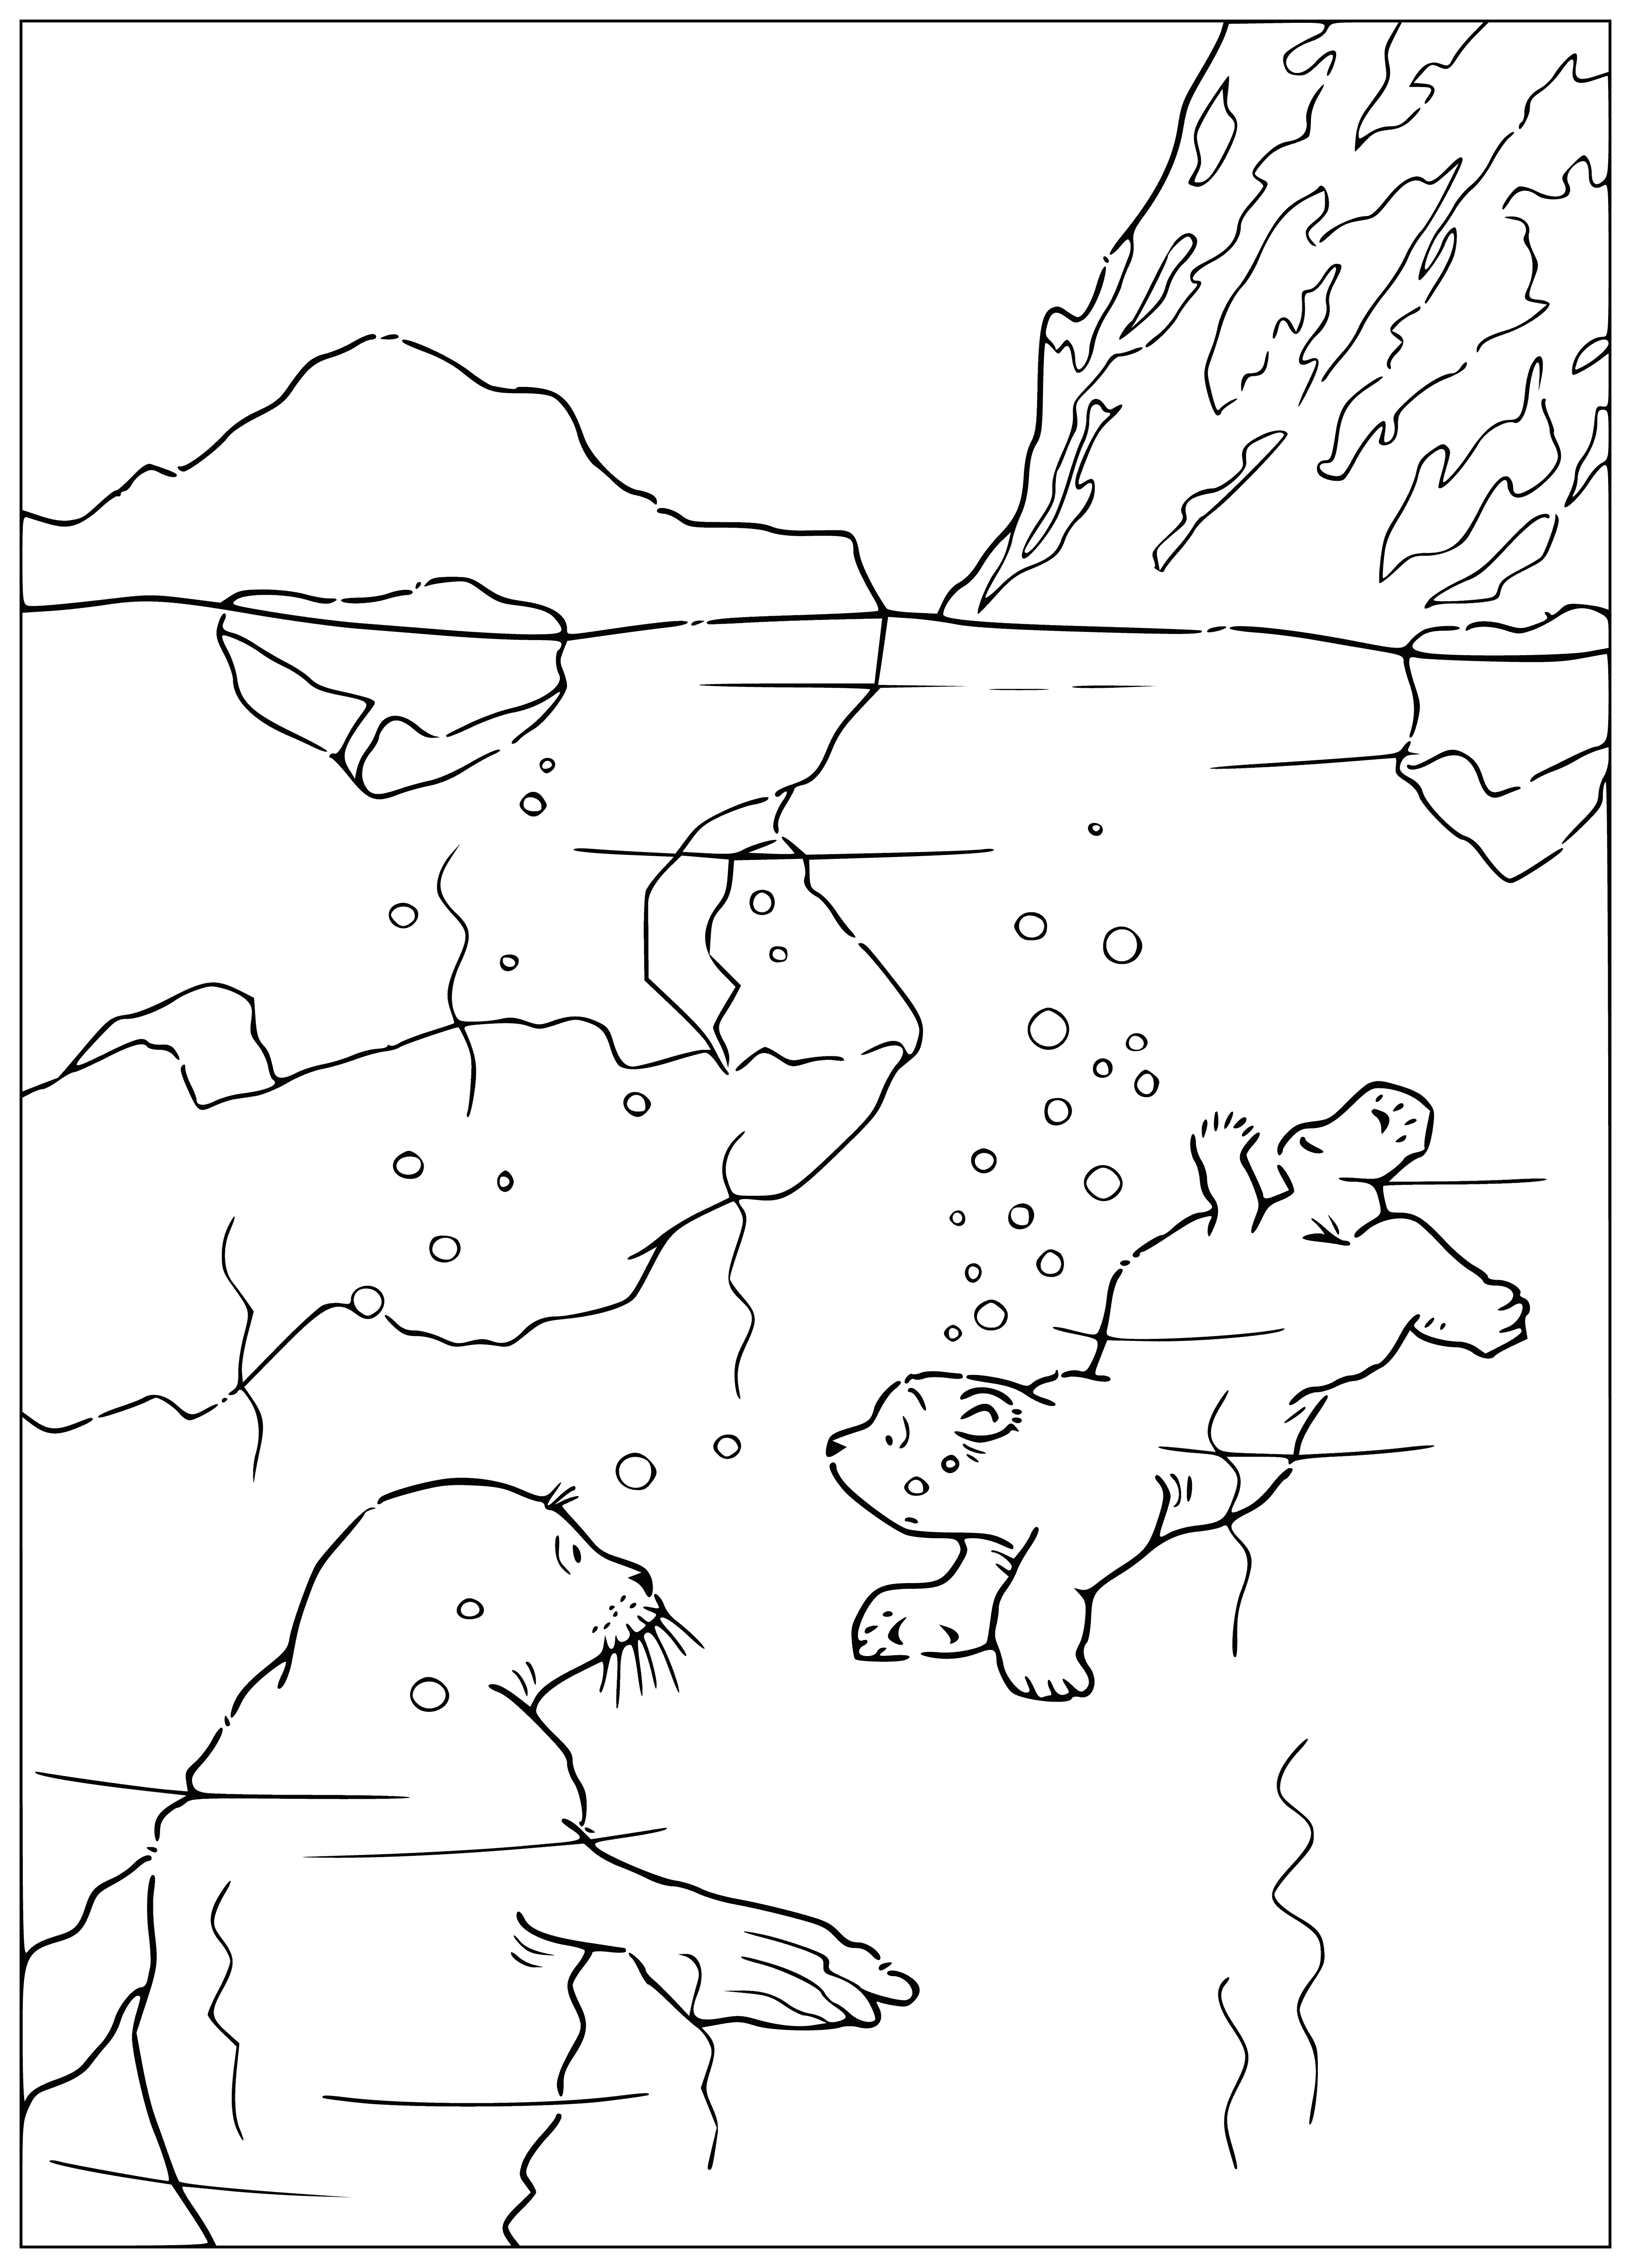 Teddy bear and seal coloring page